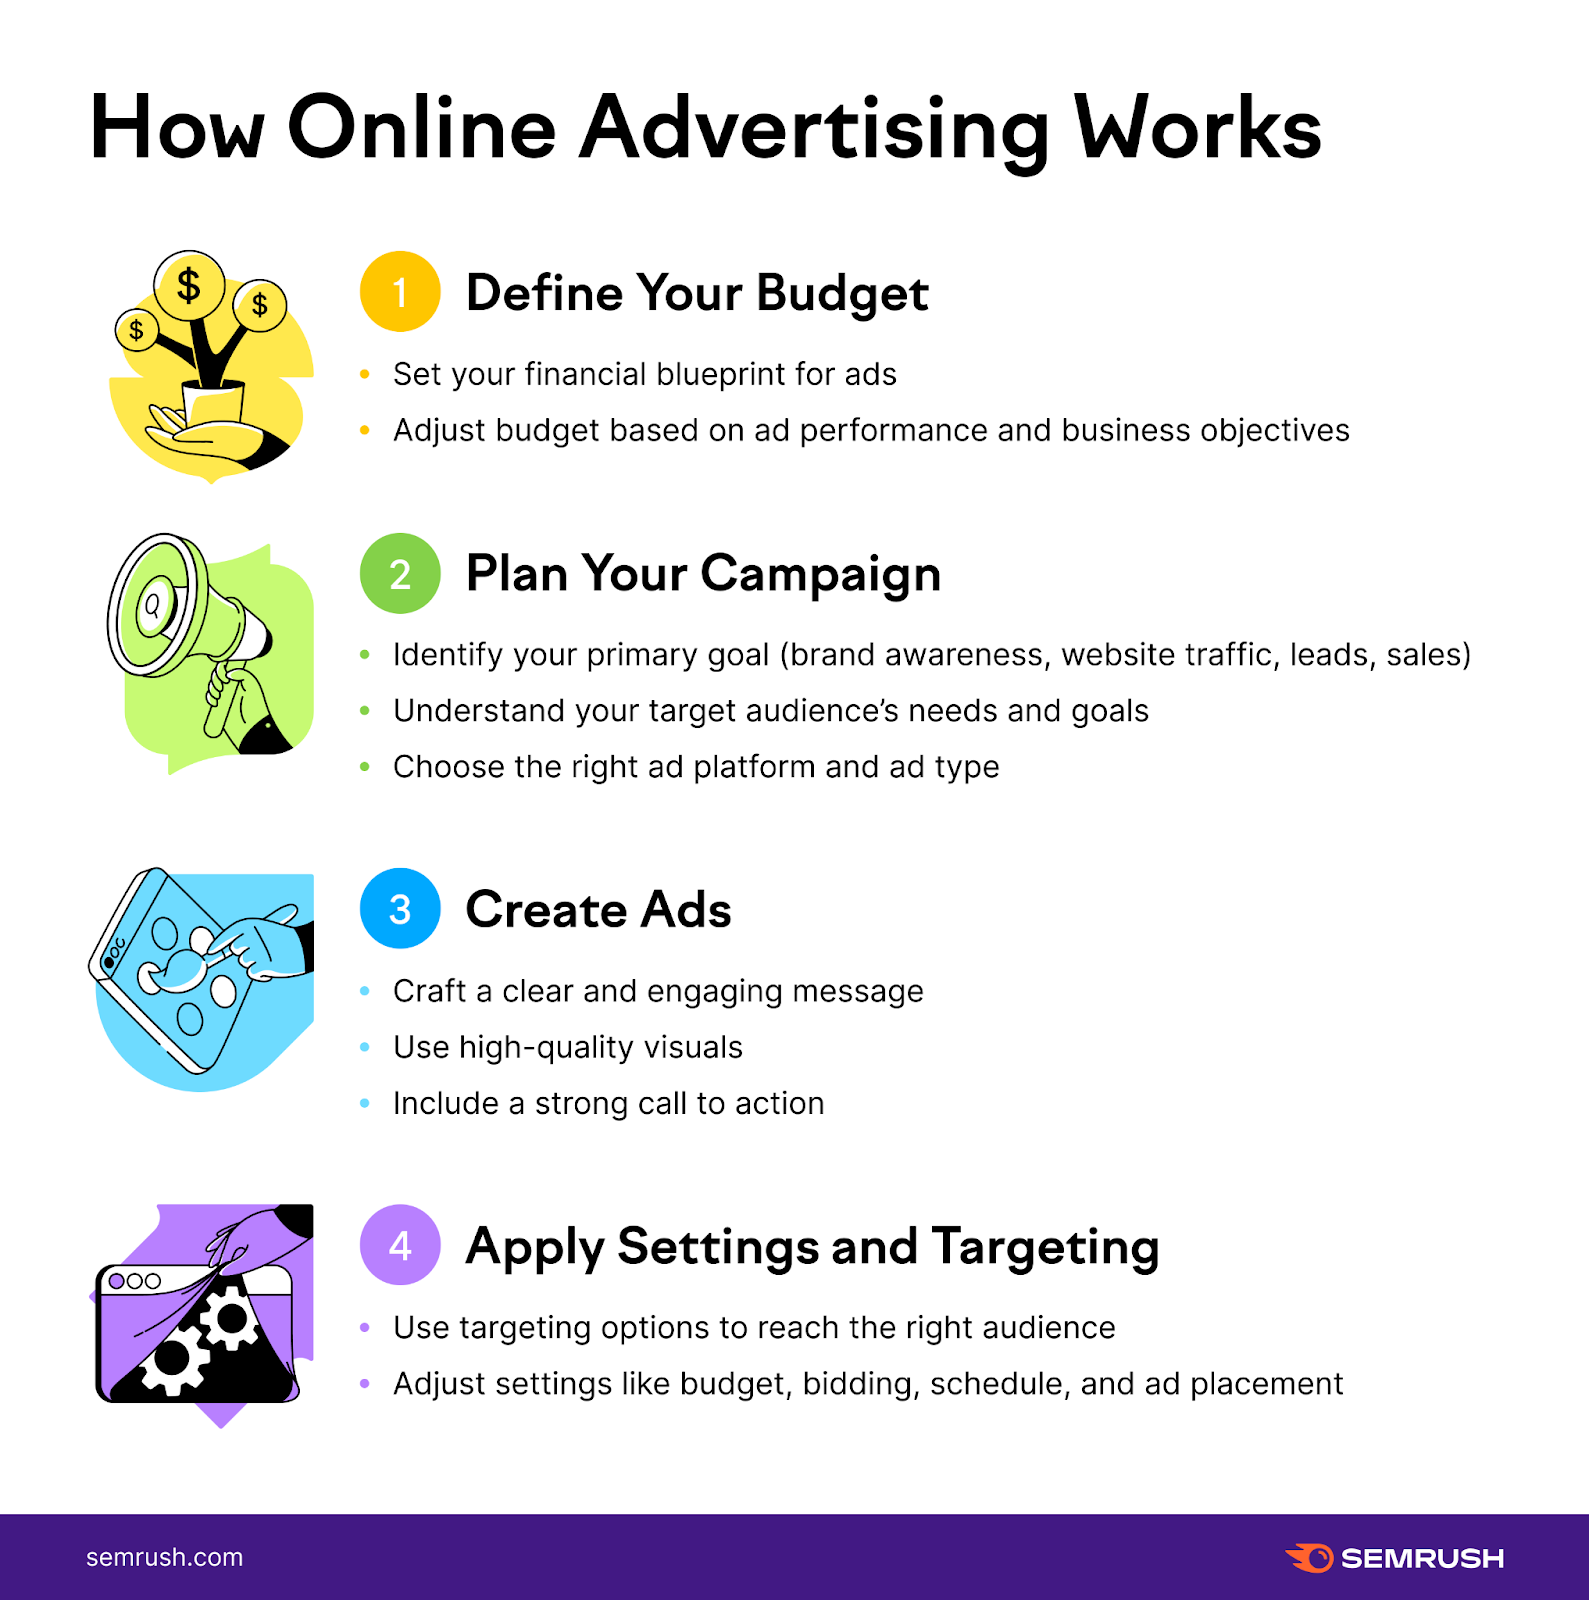 "How online advertising works" infographic